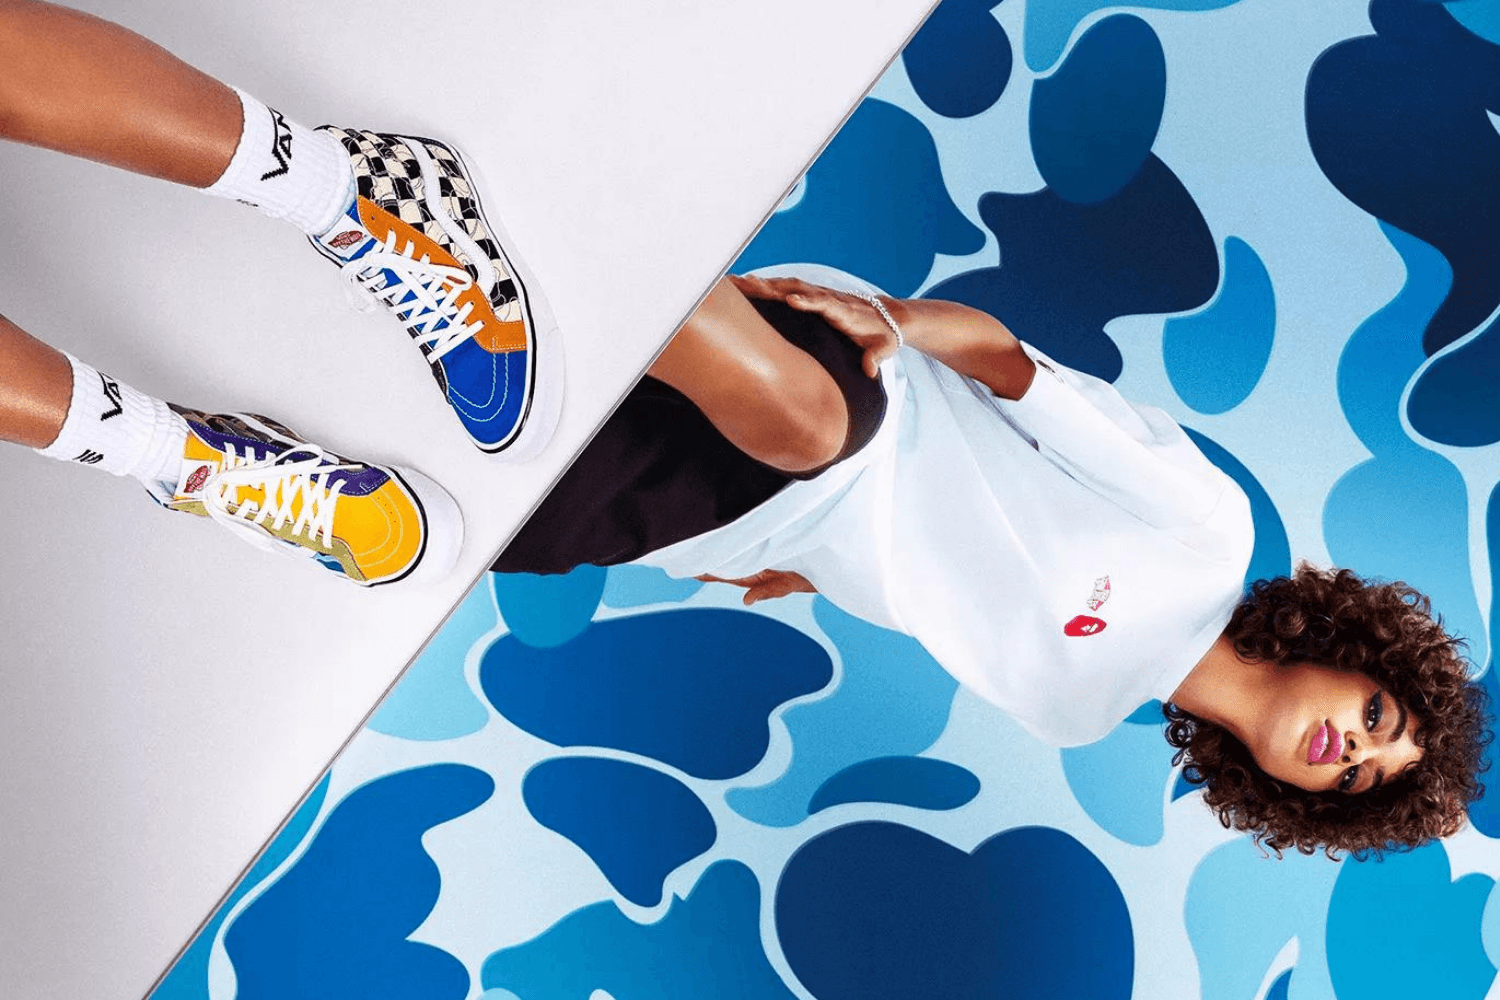 Vans and BAPE will release a new collection together